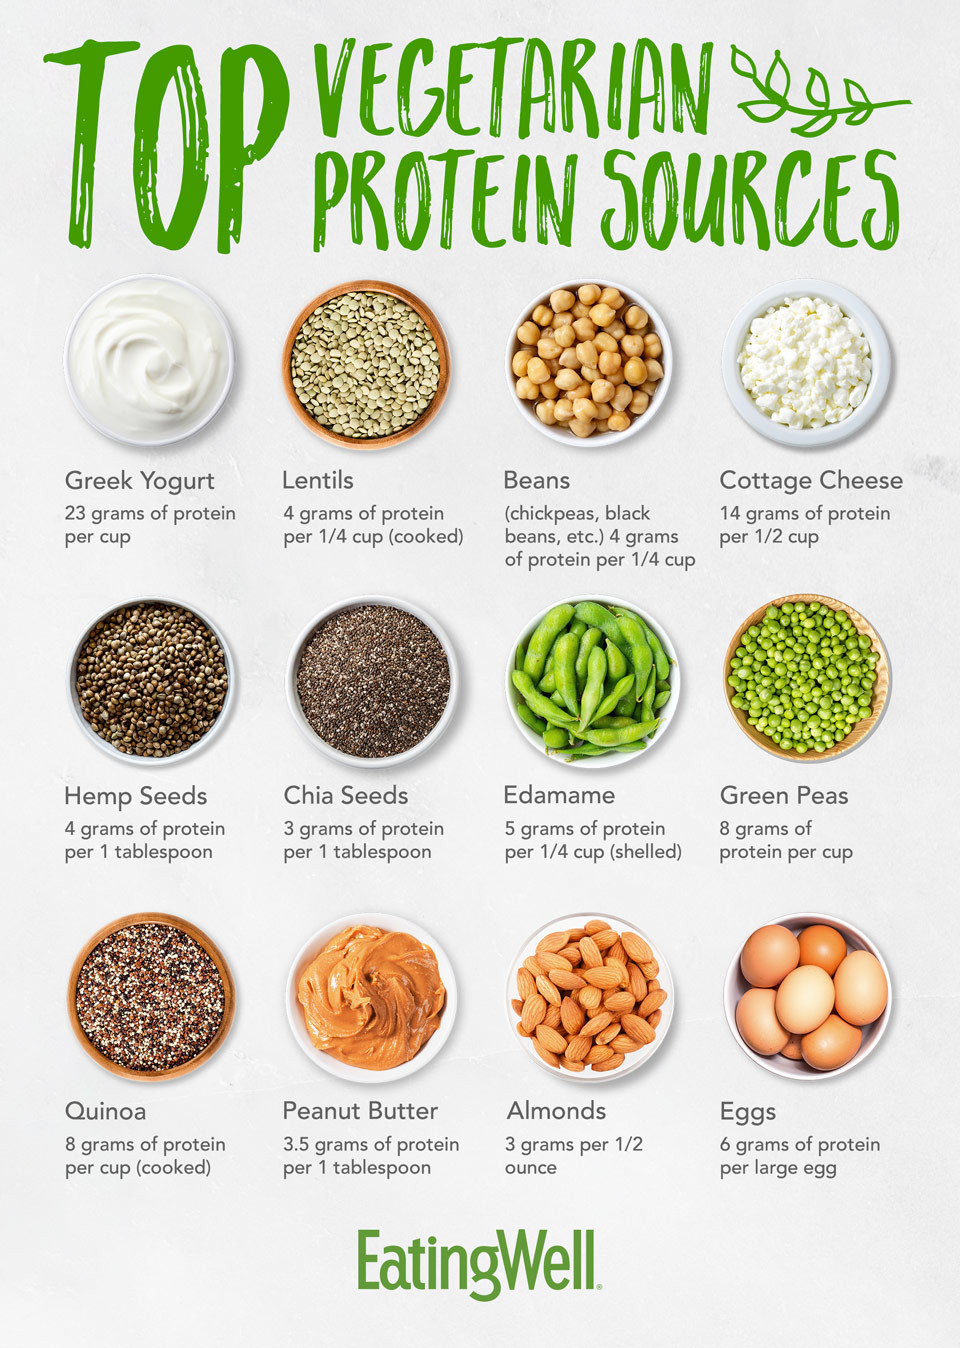 High Protein Foods Vegetarian
 Top Ve arian Protein Sources EatingWell